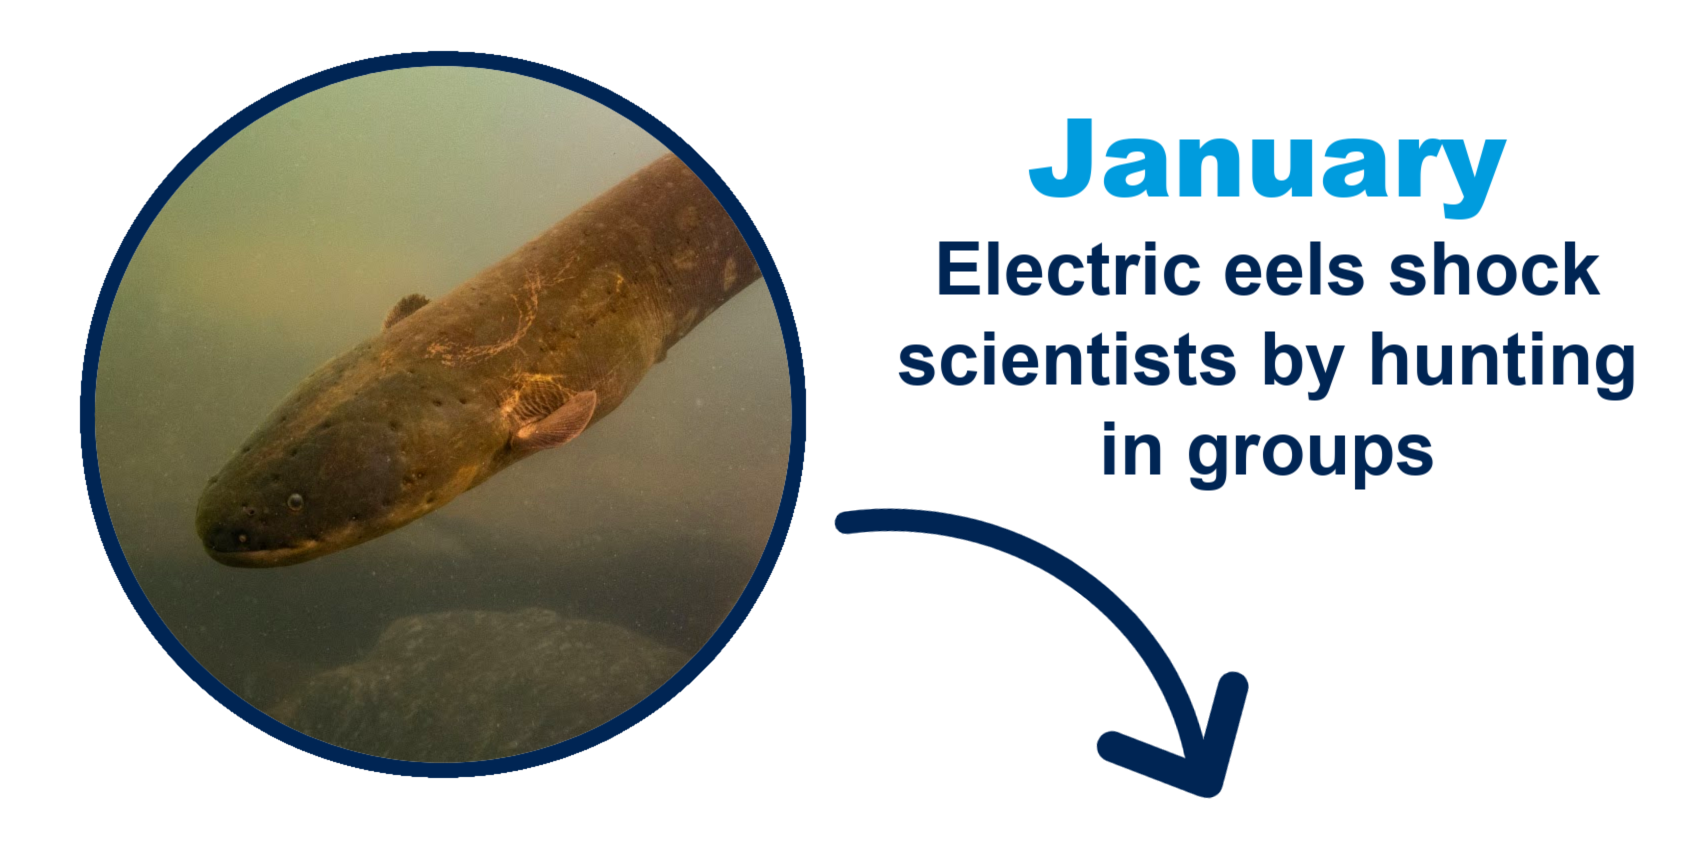 Electric eels shock scientists by hunting in groups